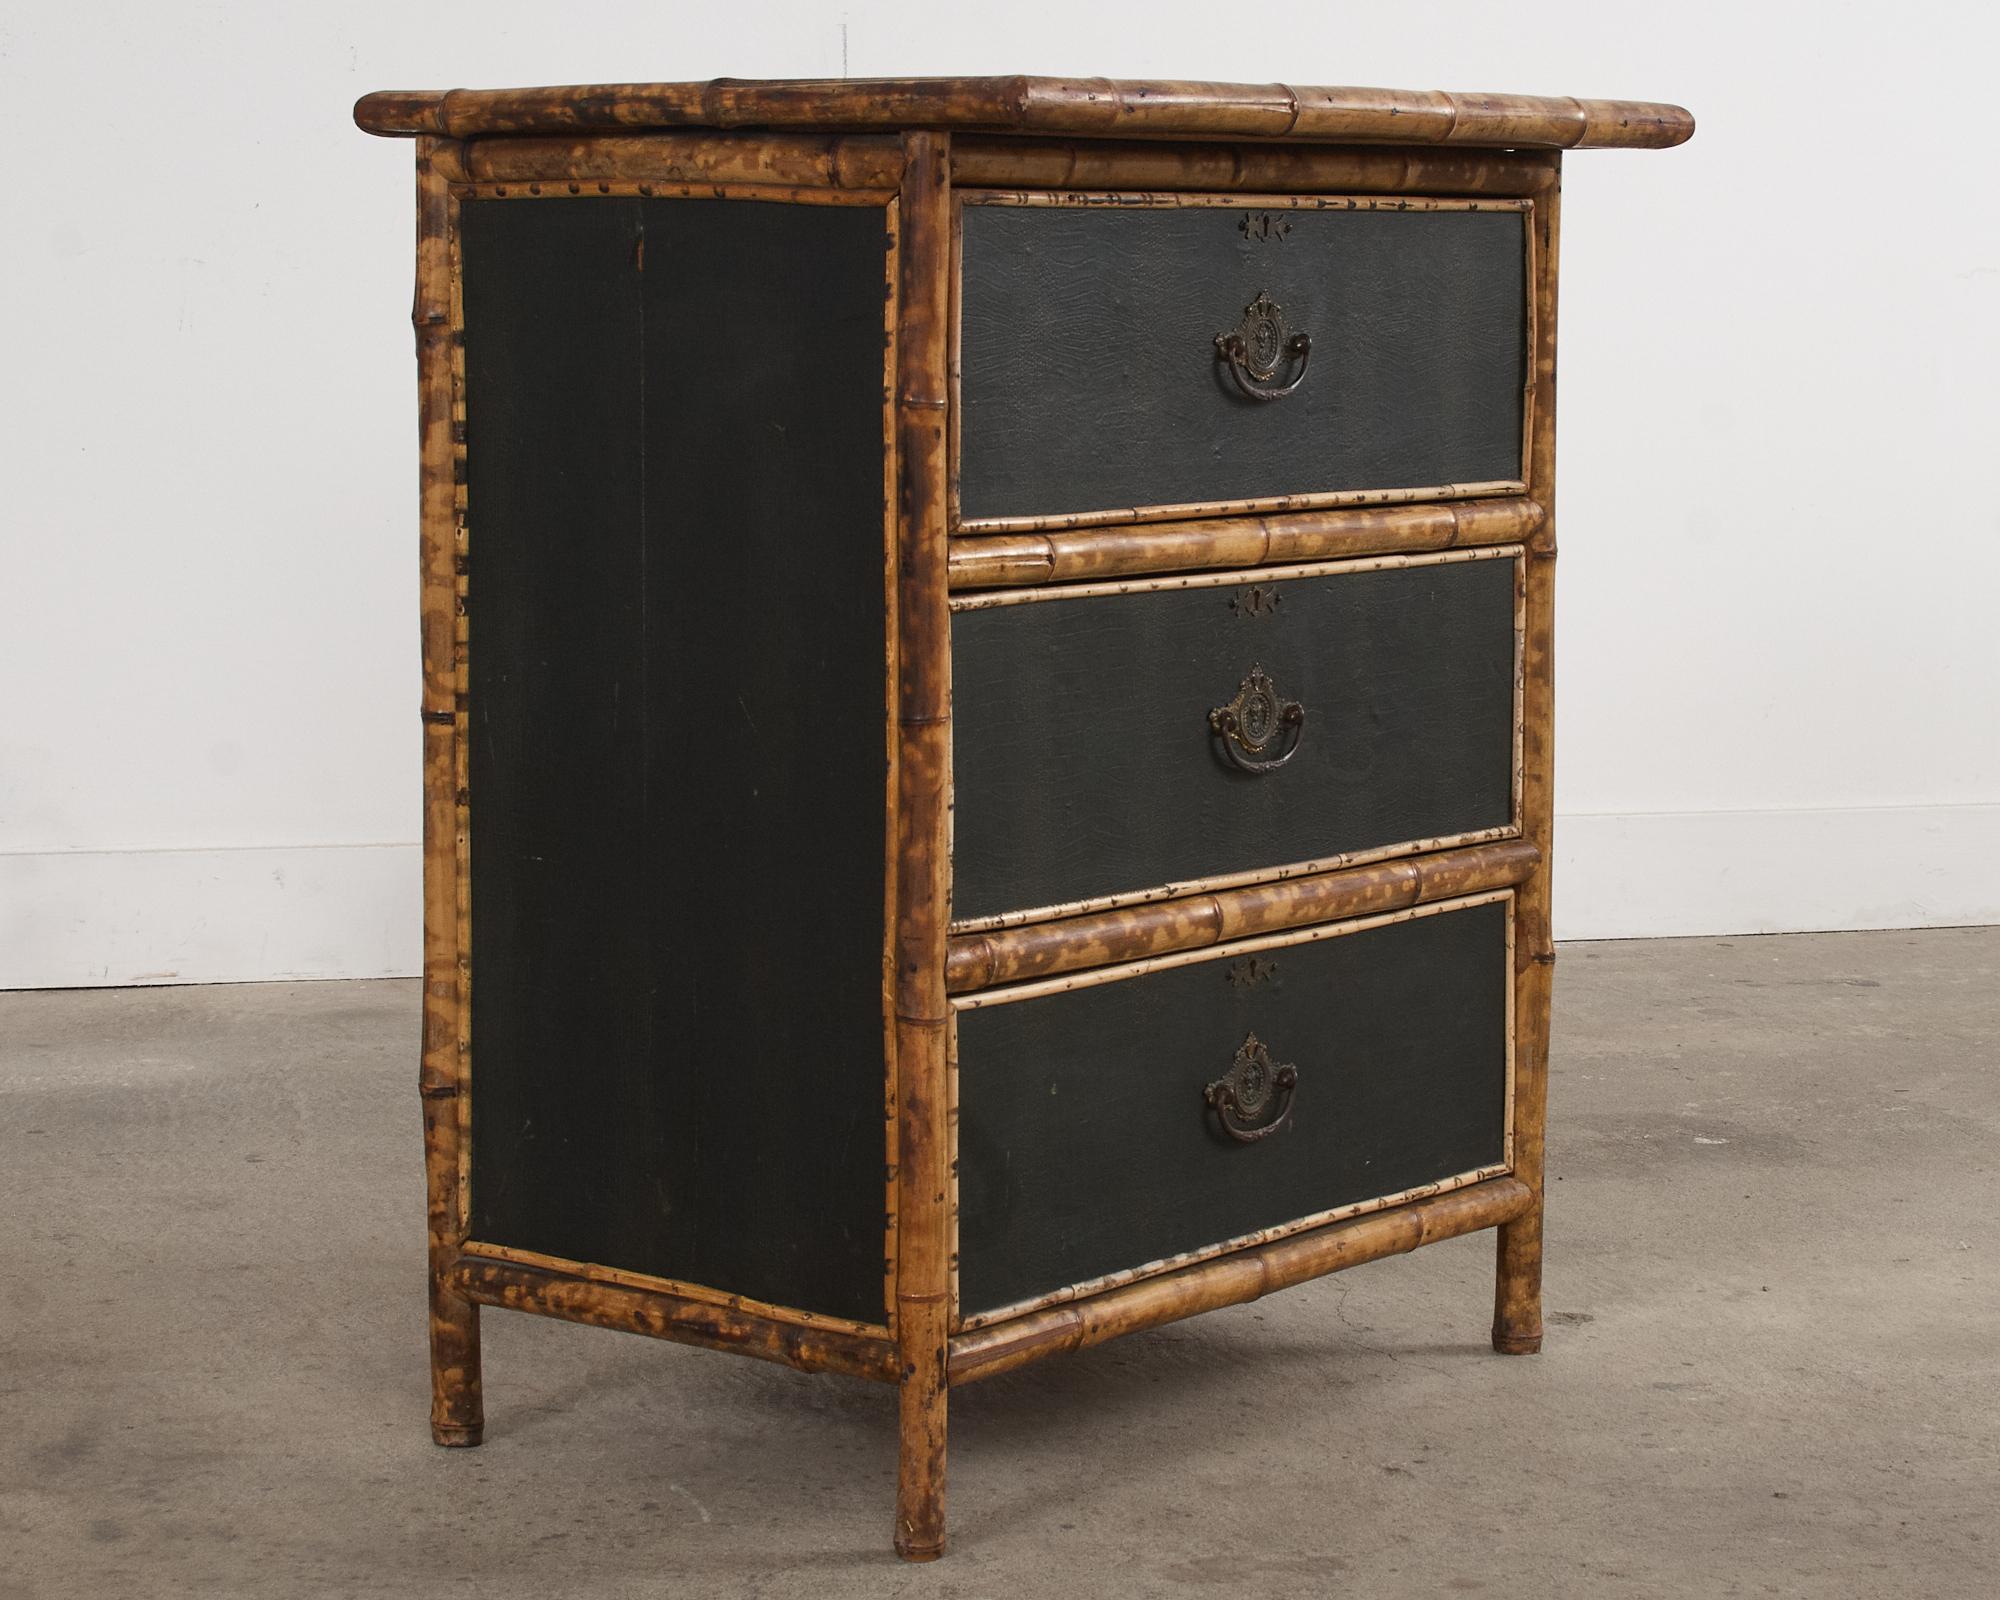 Hand-Crafted English Aesthetic Movement Tortoise Shell Bamboo Pine Chest